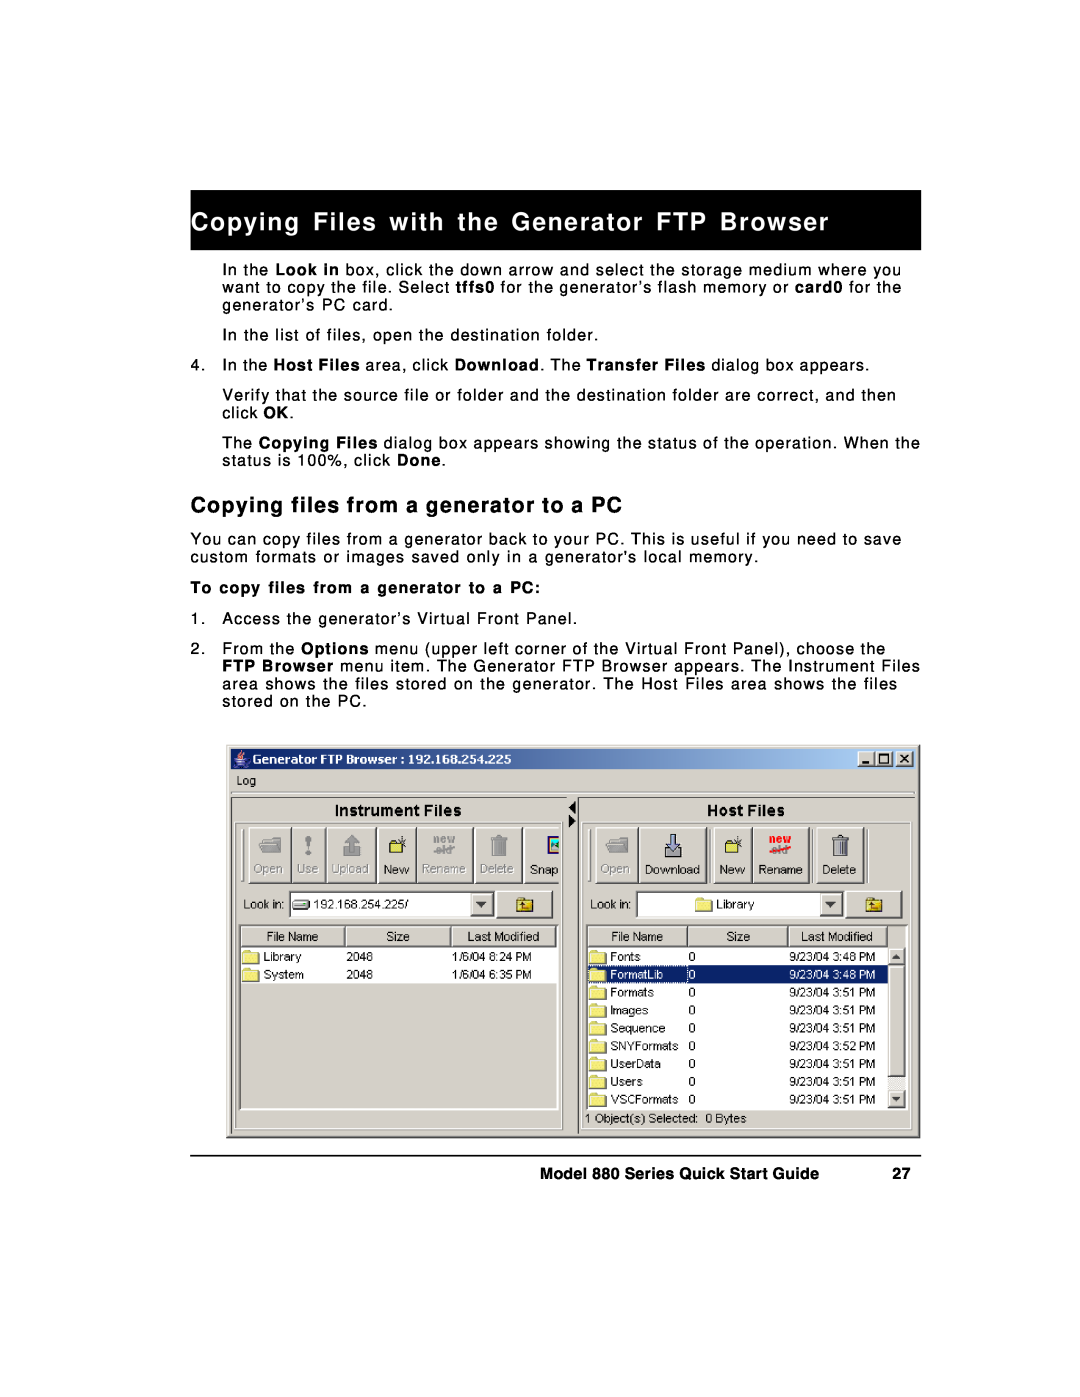 Quantum Data 880 quick start Copying Files with the Generator FTP Browser, Copying files from a generator to a PC 